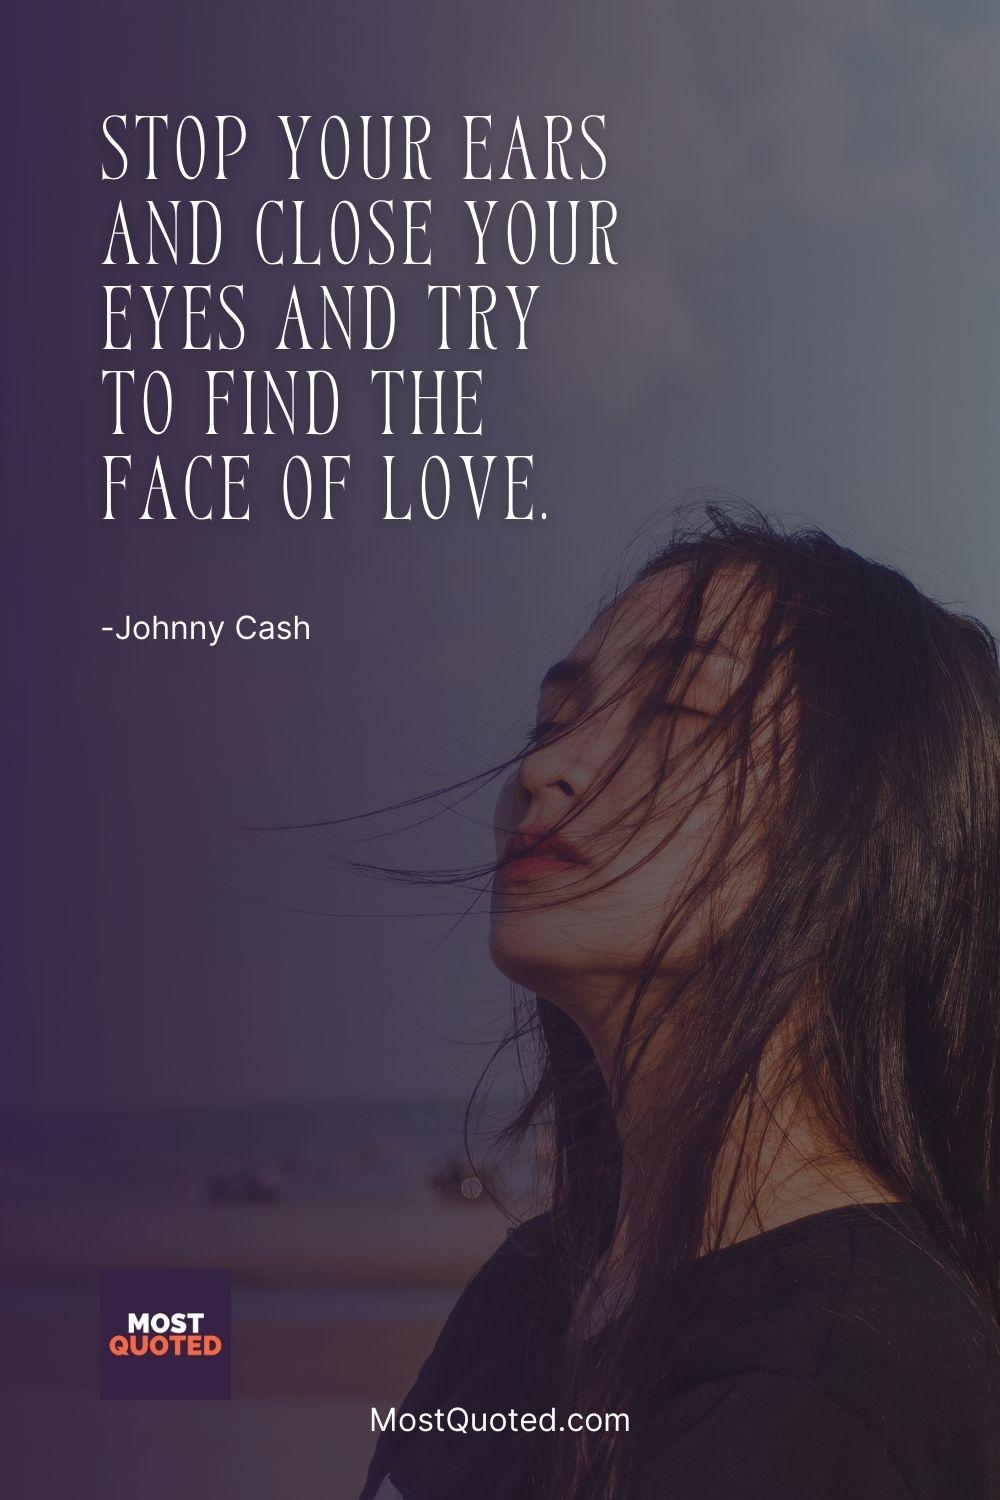 Stop your ears and close your eyes and try to find the face of love. - Johnny Cash